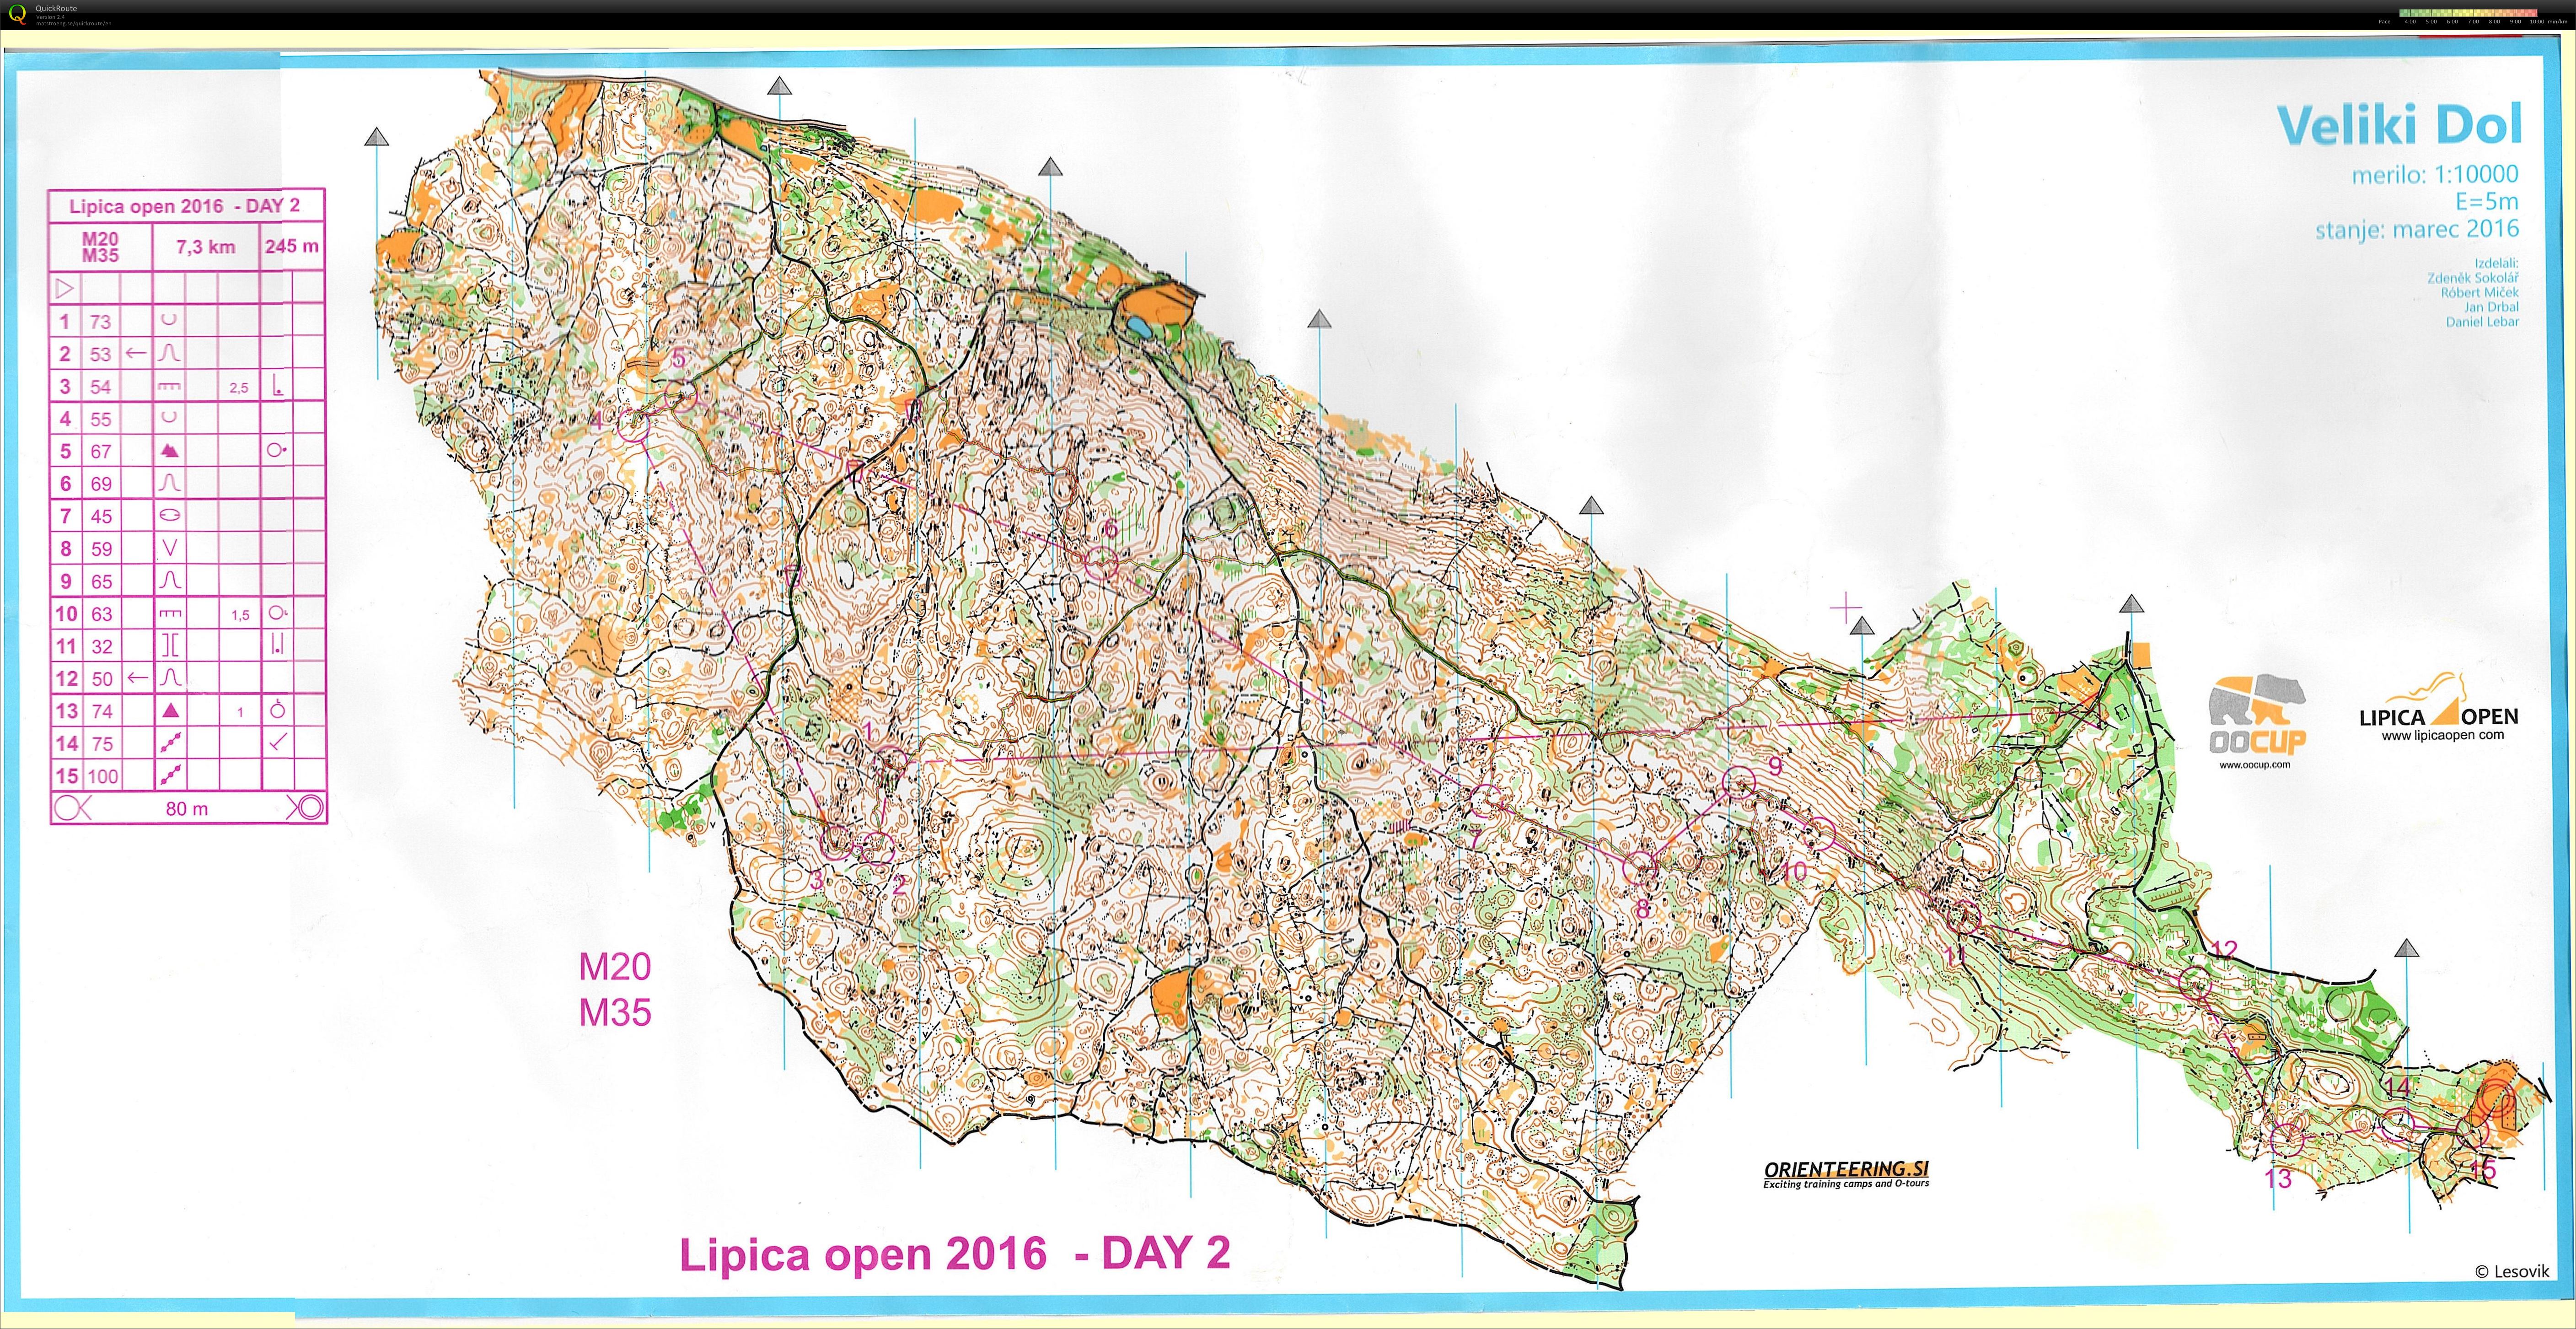 Lipica Open 2016 Day 2 (2016-03-13)